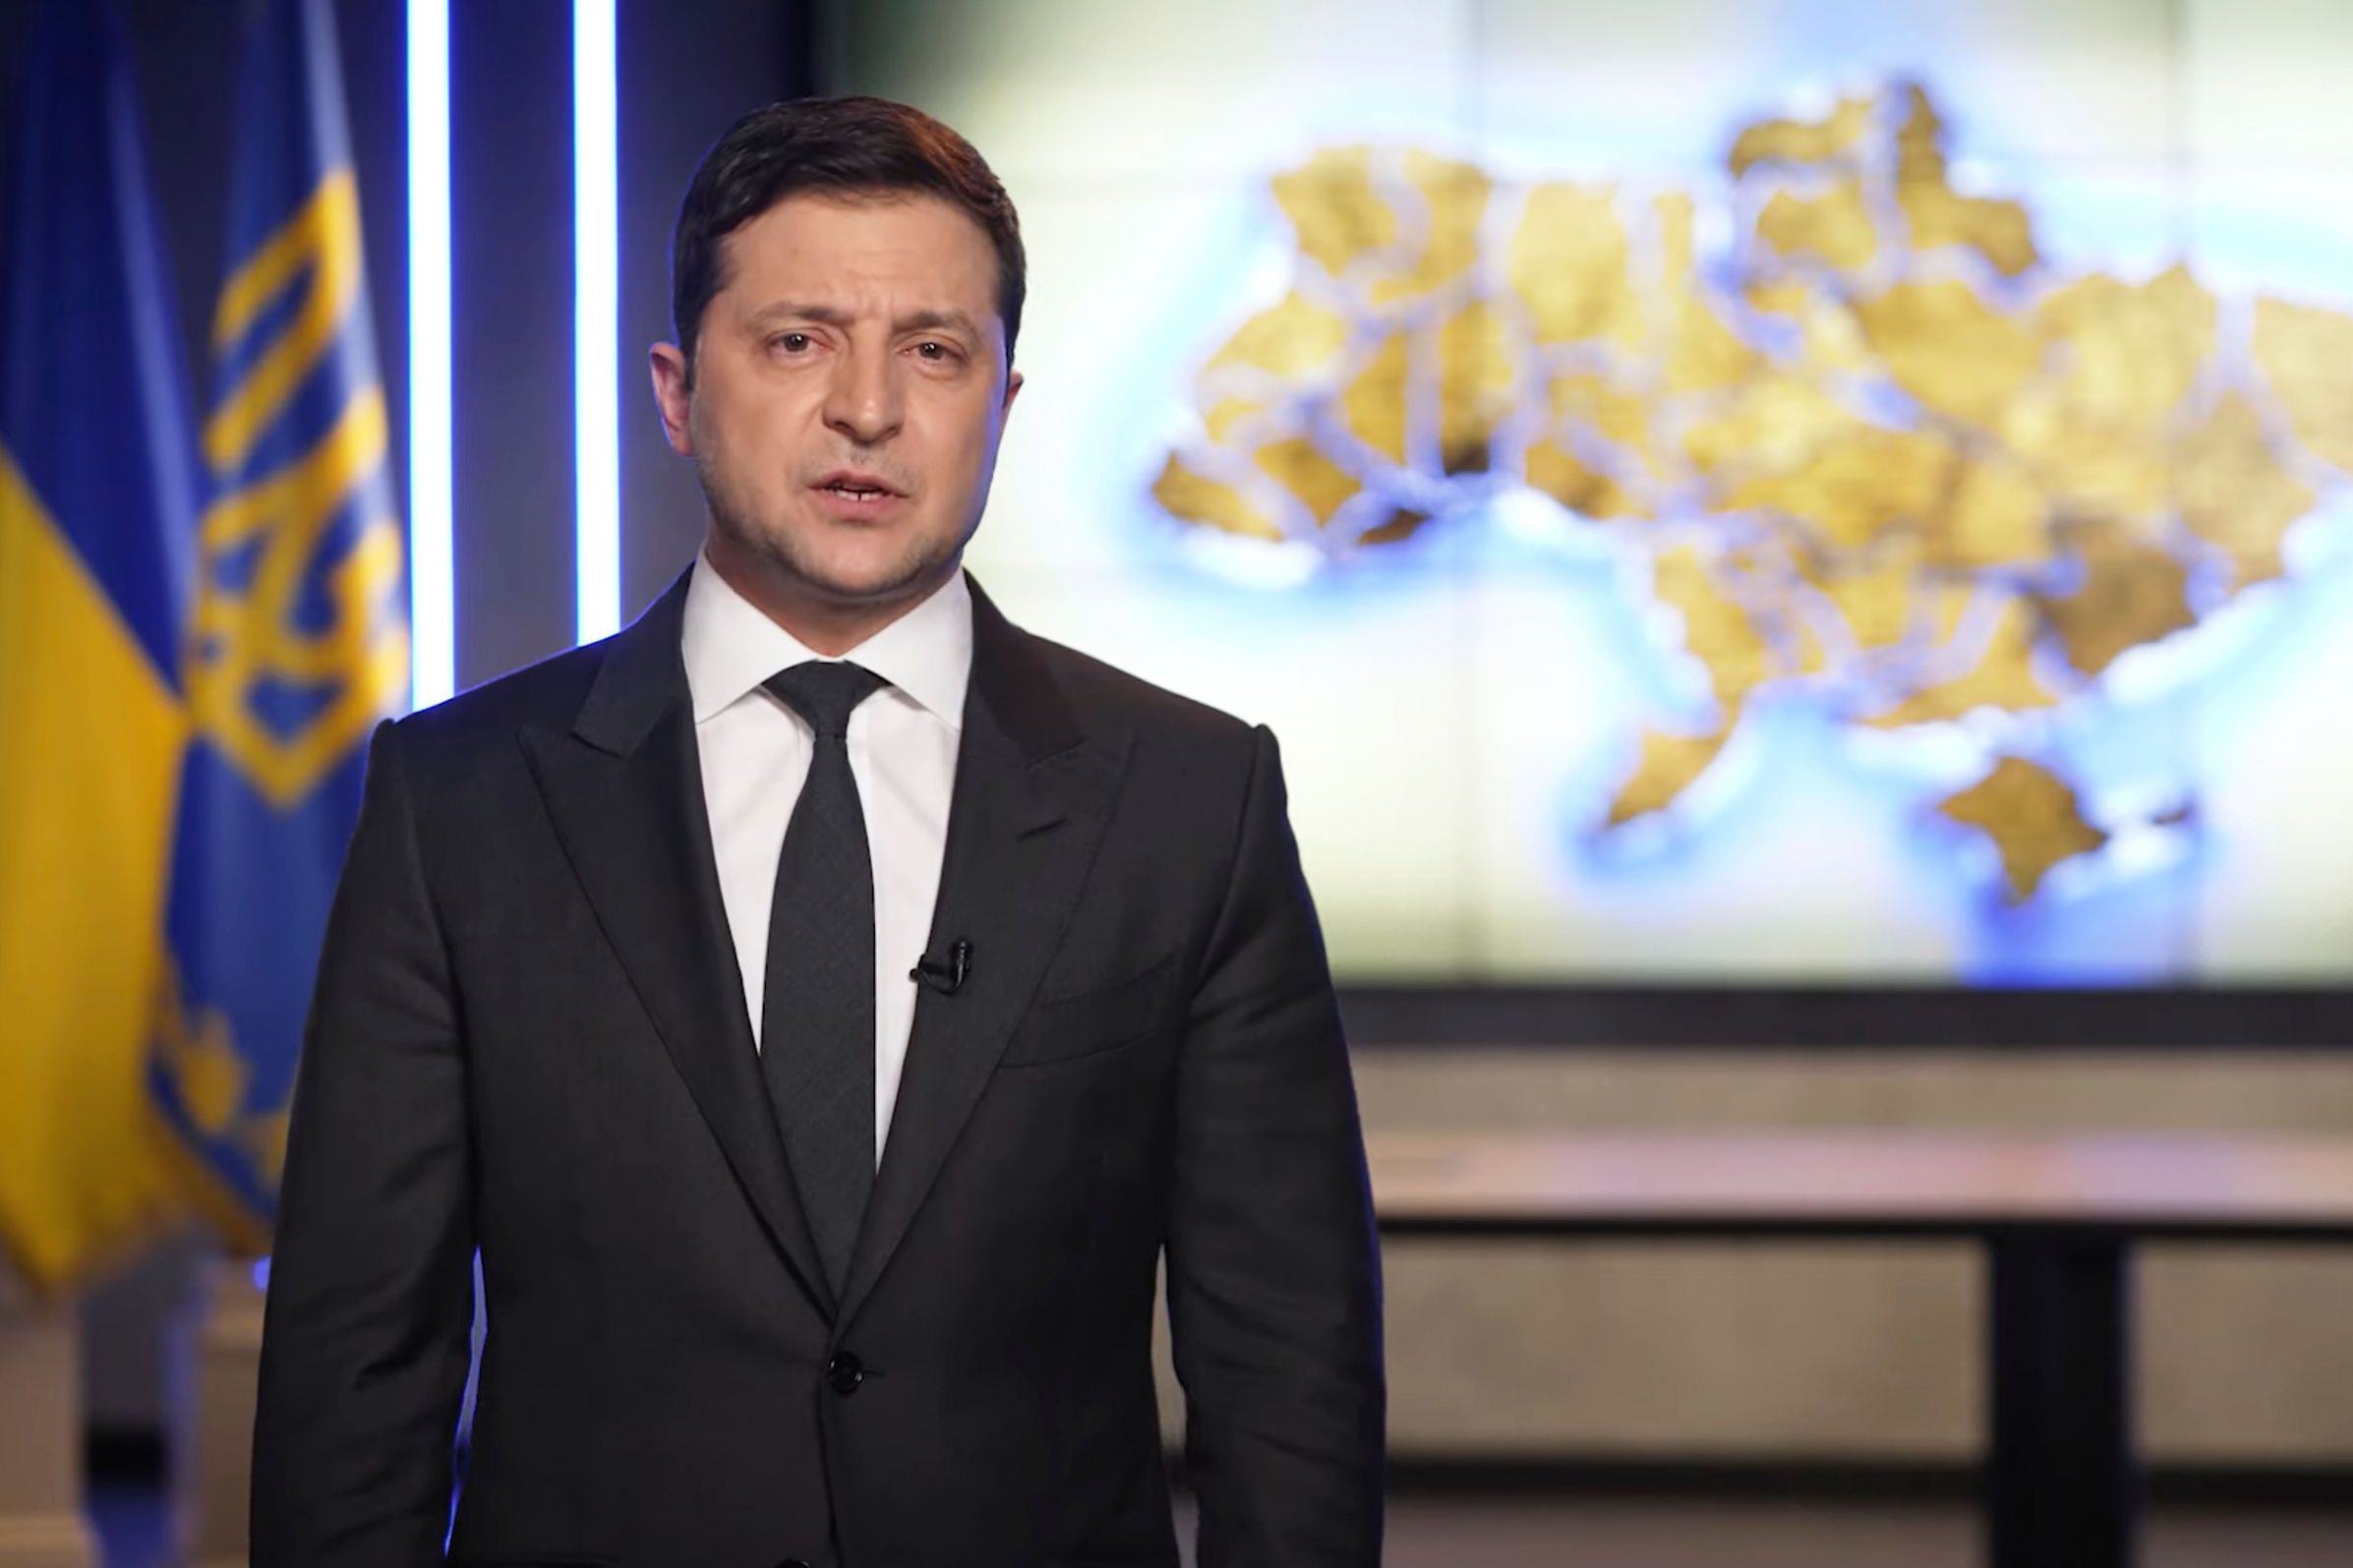 Zelensky asks US for more sanctions on Russia, no-fly zone over Ukraine: Report